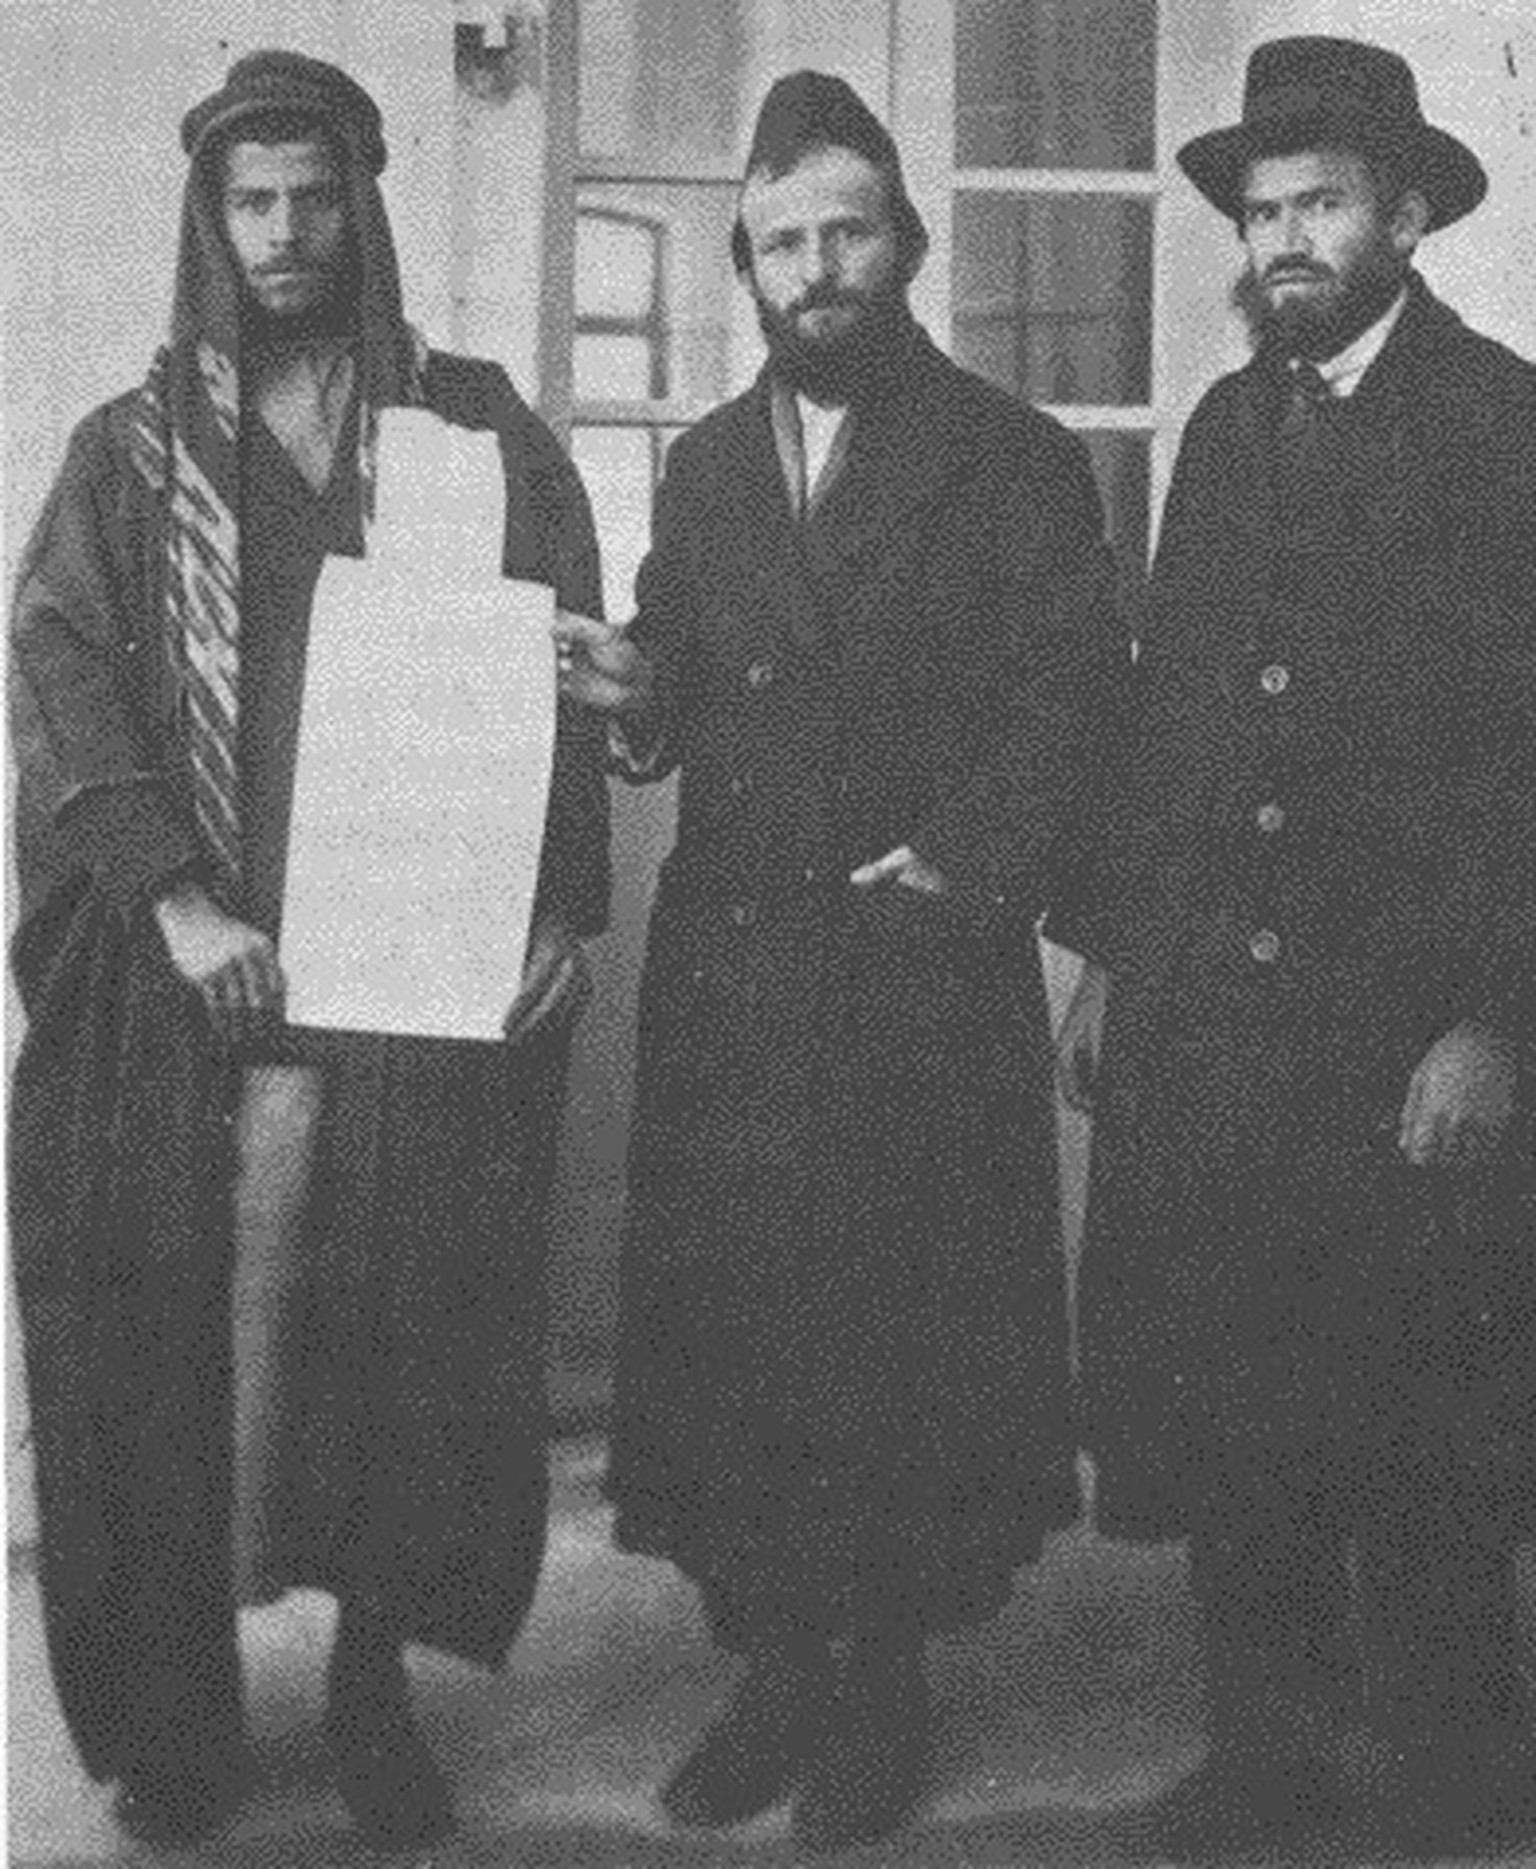 Jewish rabbis purchasing land from an Arab landowner, 1920s.
https://commons.wikimedia.org/w/index.php?curid=17623103